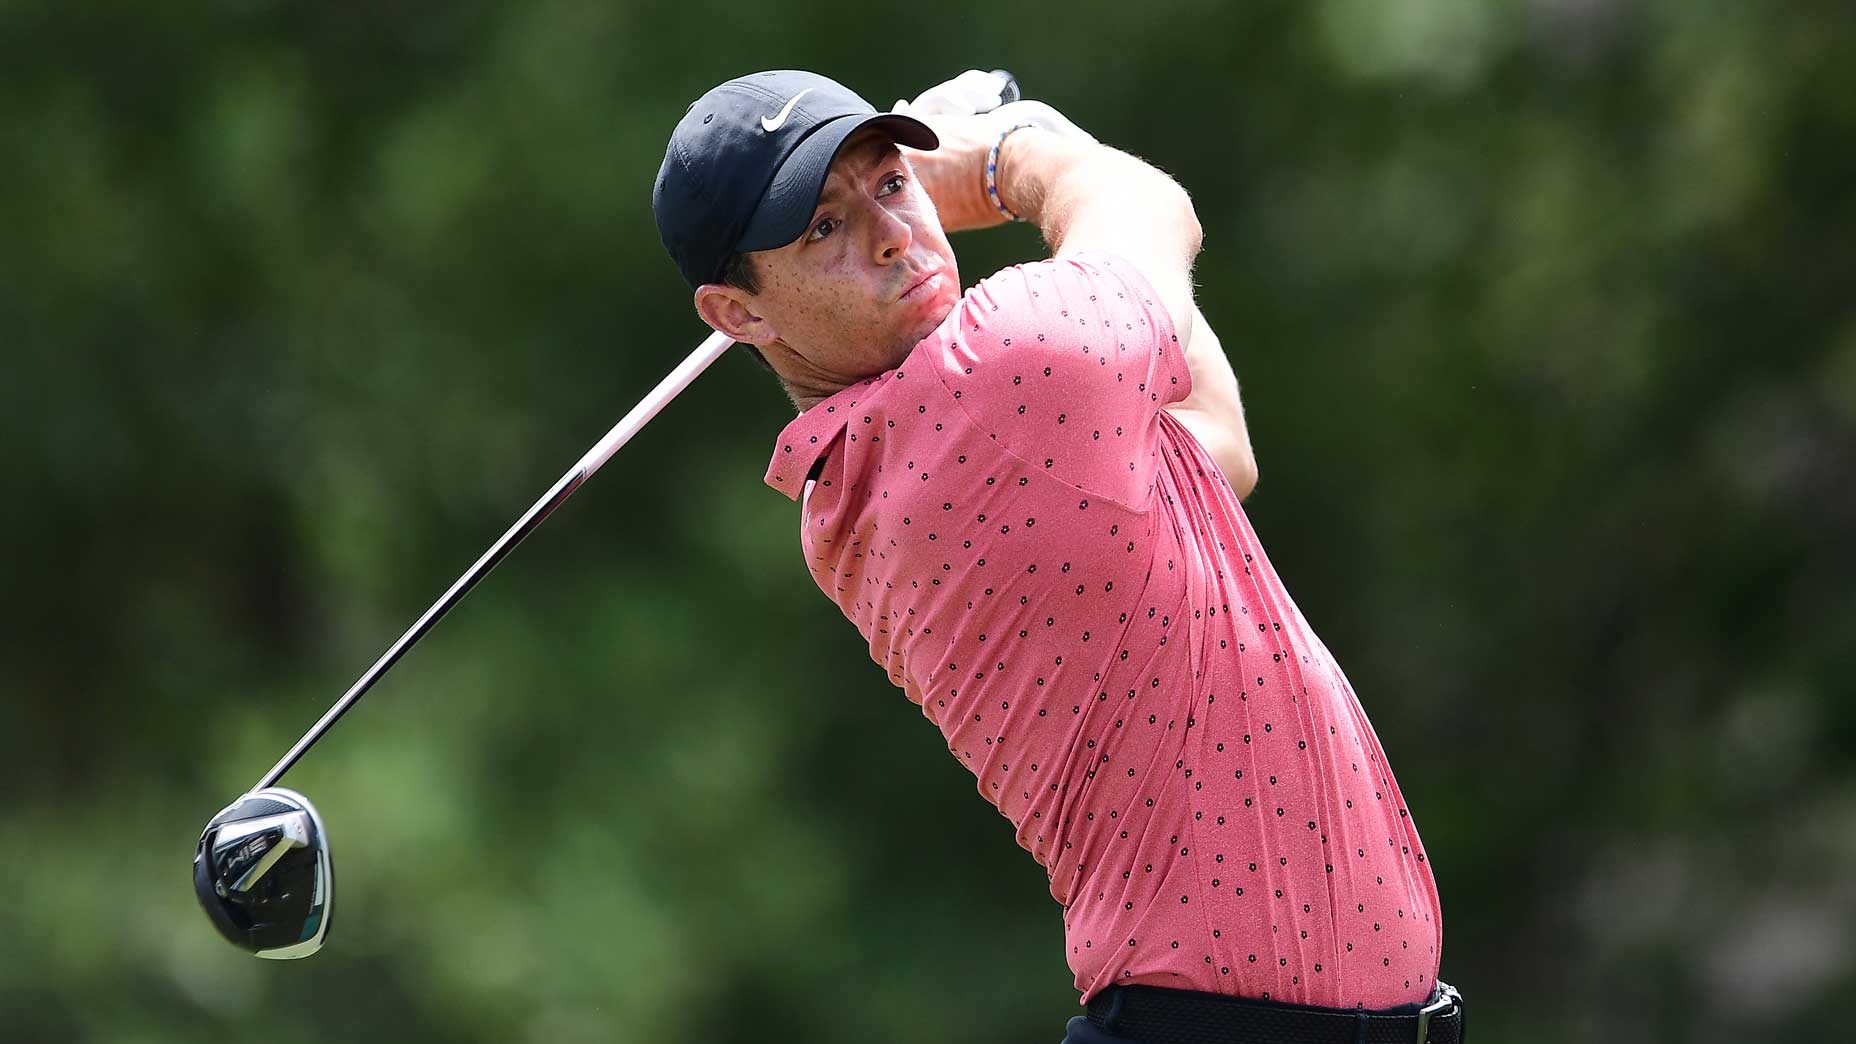 Rory McIlroy watches drive at 2021 FedEx St. Jude Championship